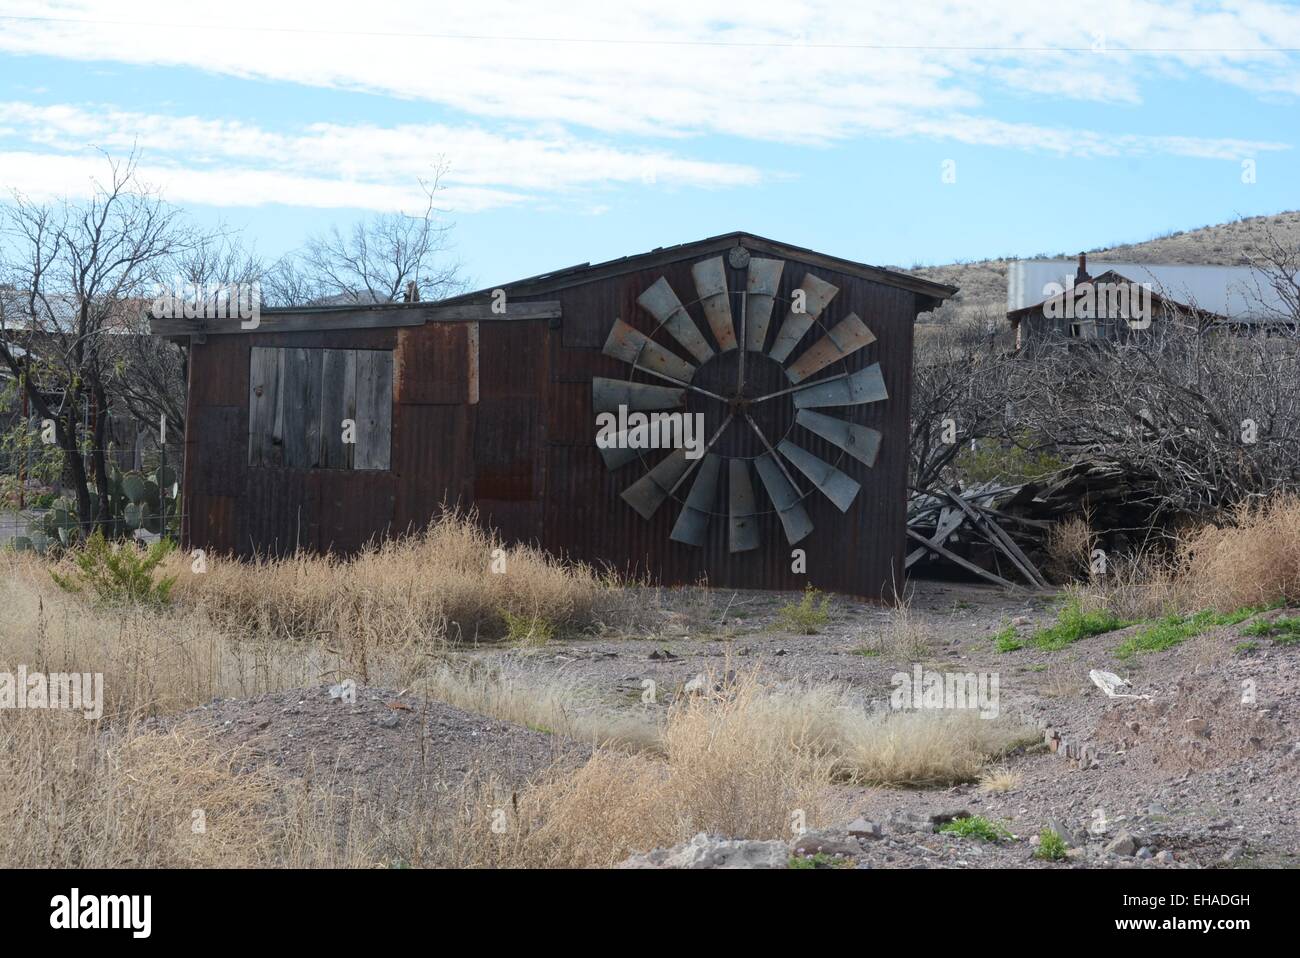 Windmill blades adorn old building at Steins Ghost Town, New Mexico - USA Stock Photo